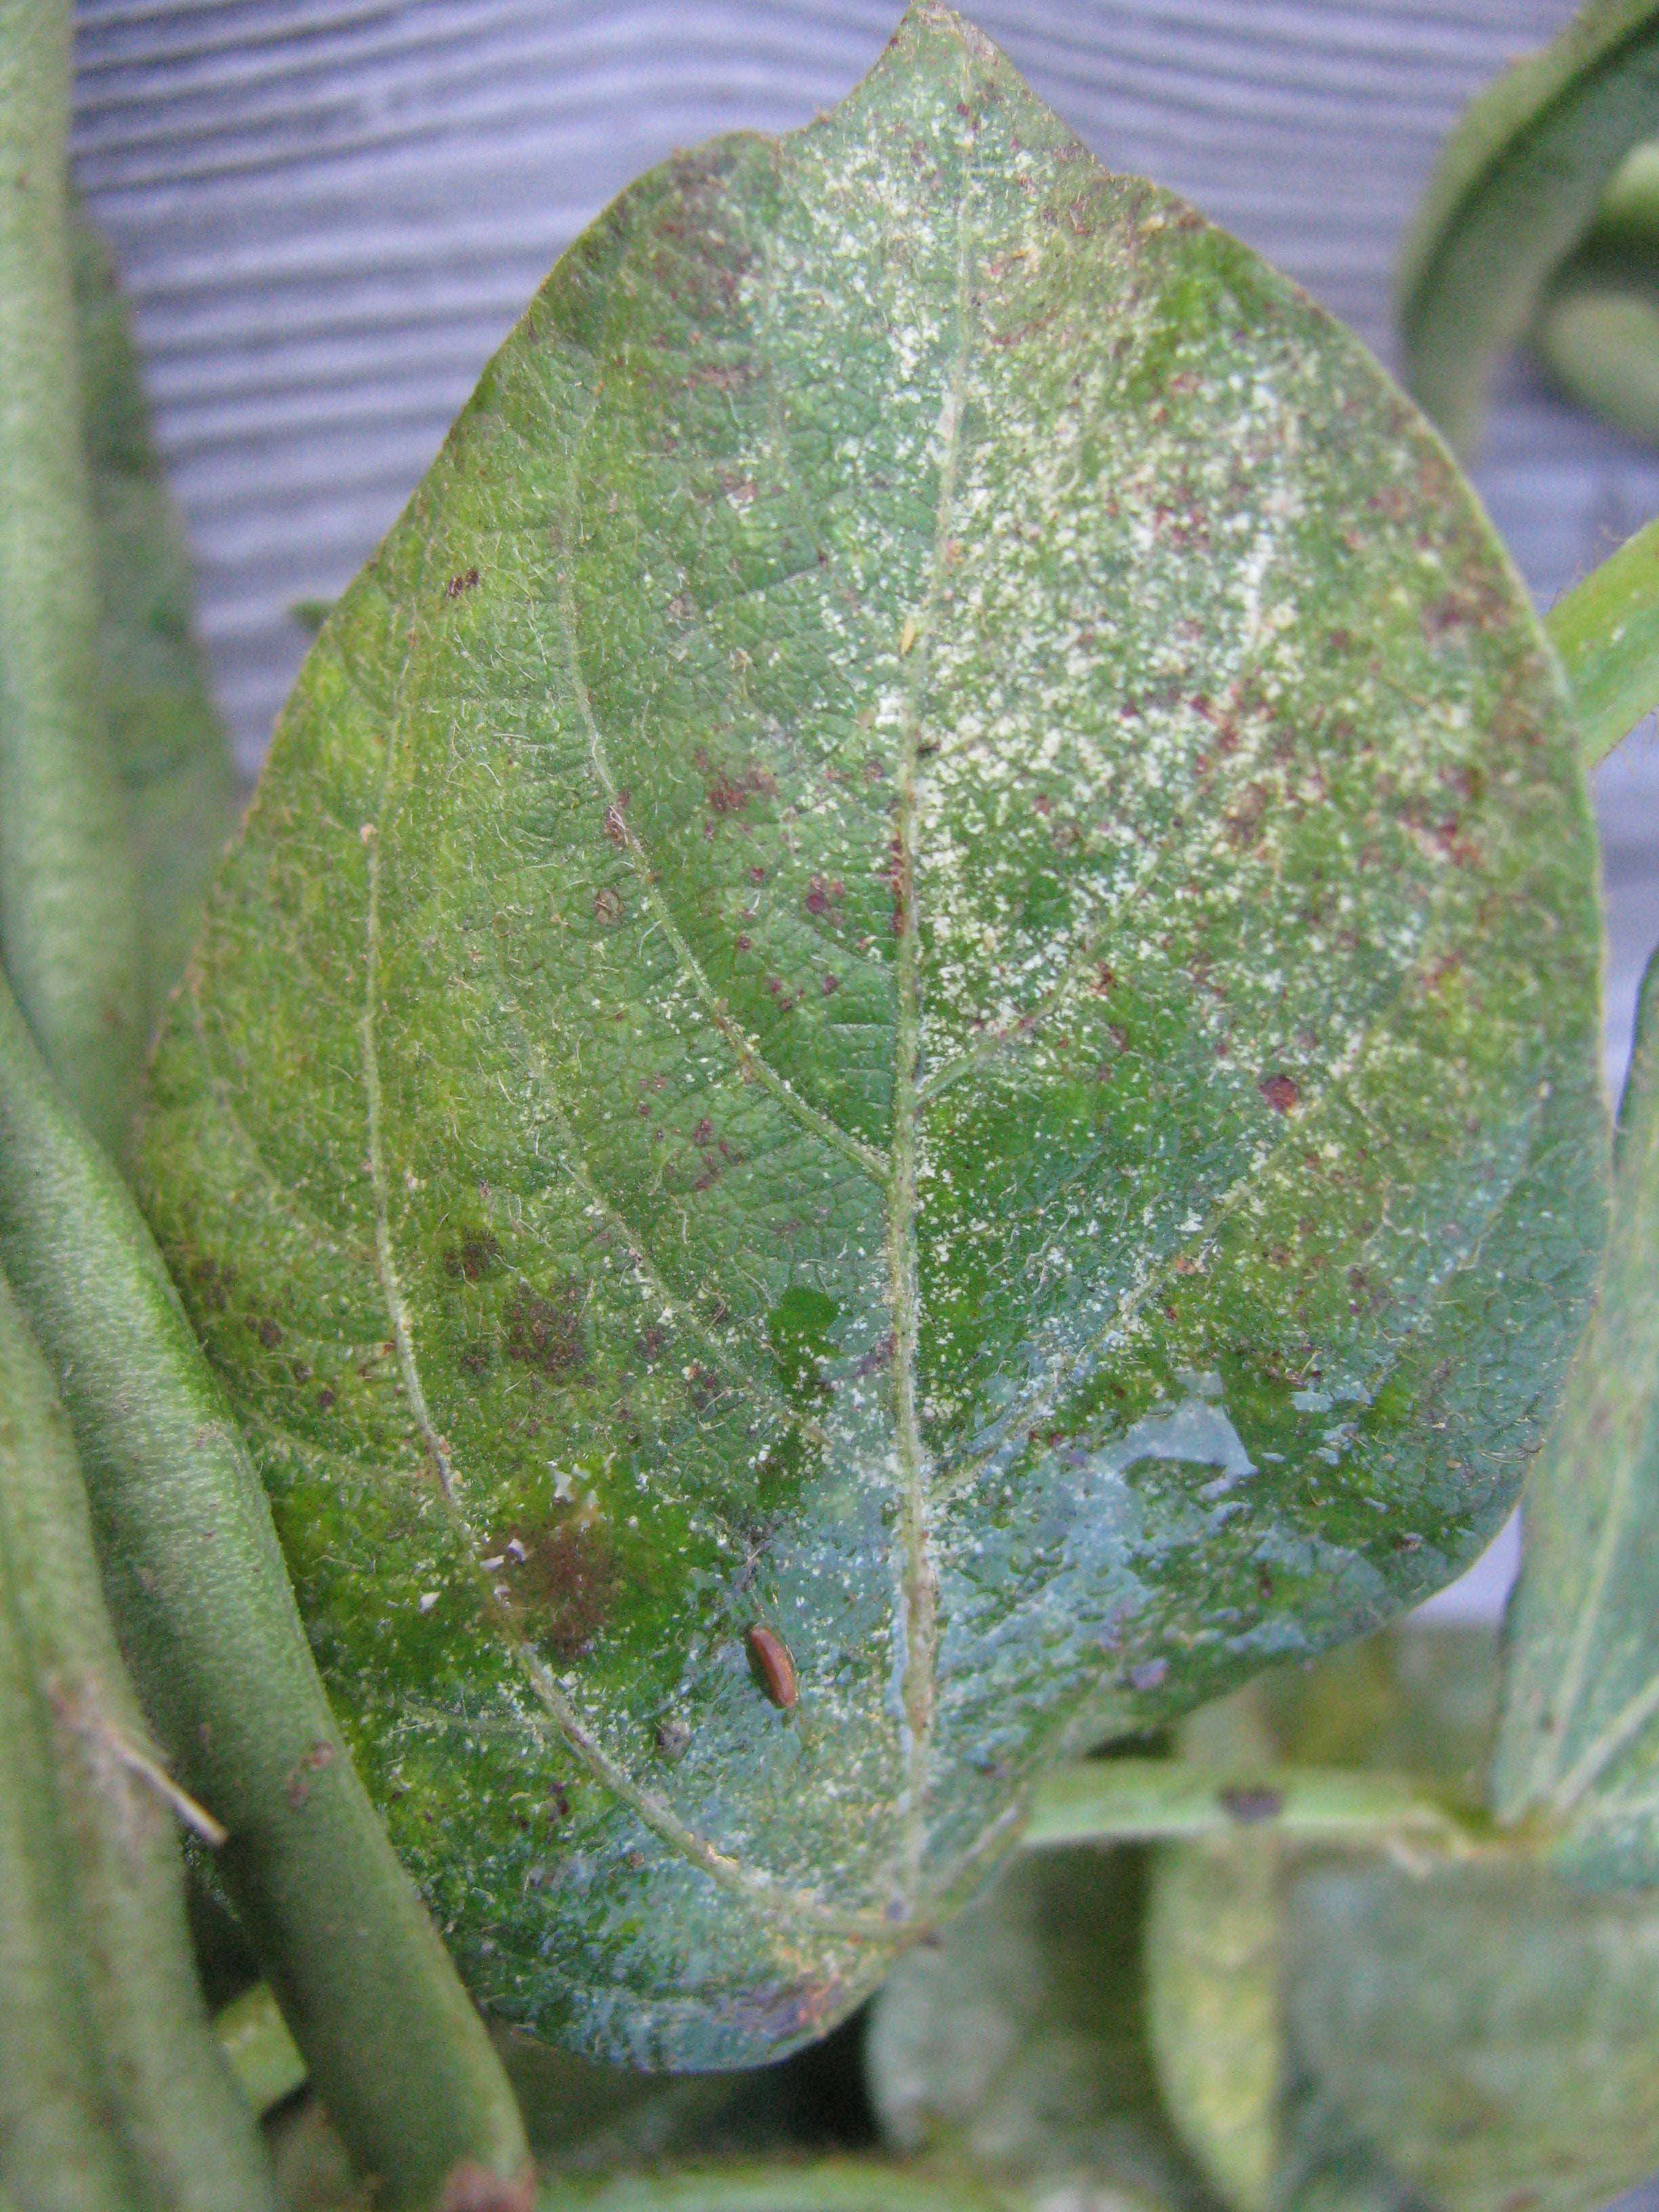 Severe spider mite infestation in an adzuki bean crop. Note the silvering of the lower leaf surface and white stippling on the upper surface of some leaves from a very dense population of spider mites feeding on these leaves.